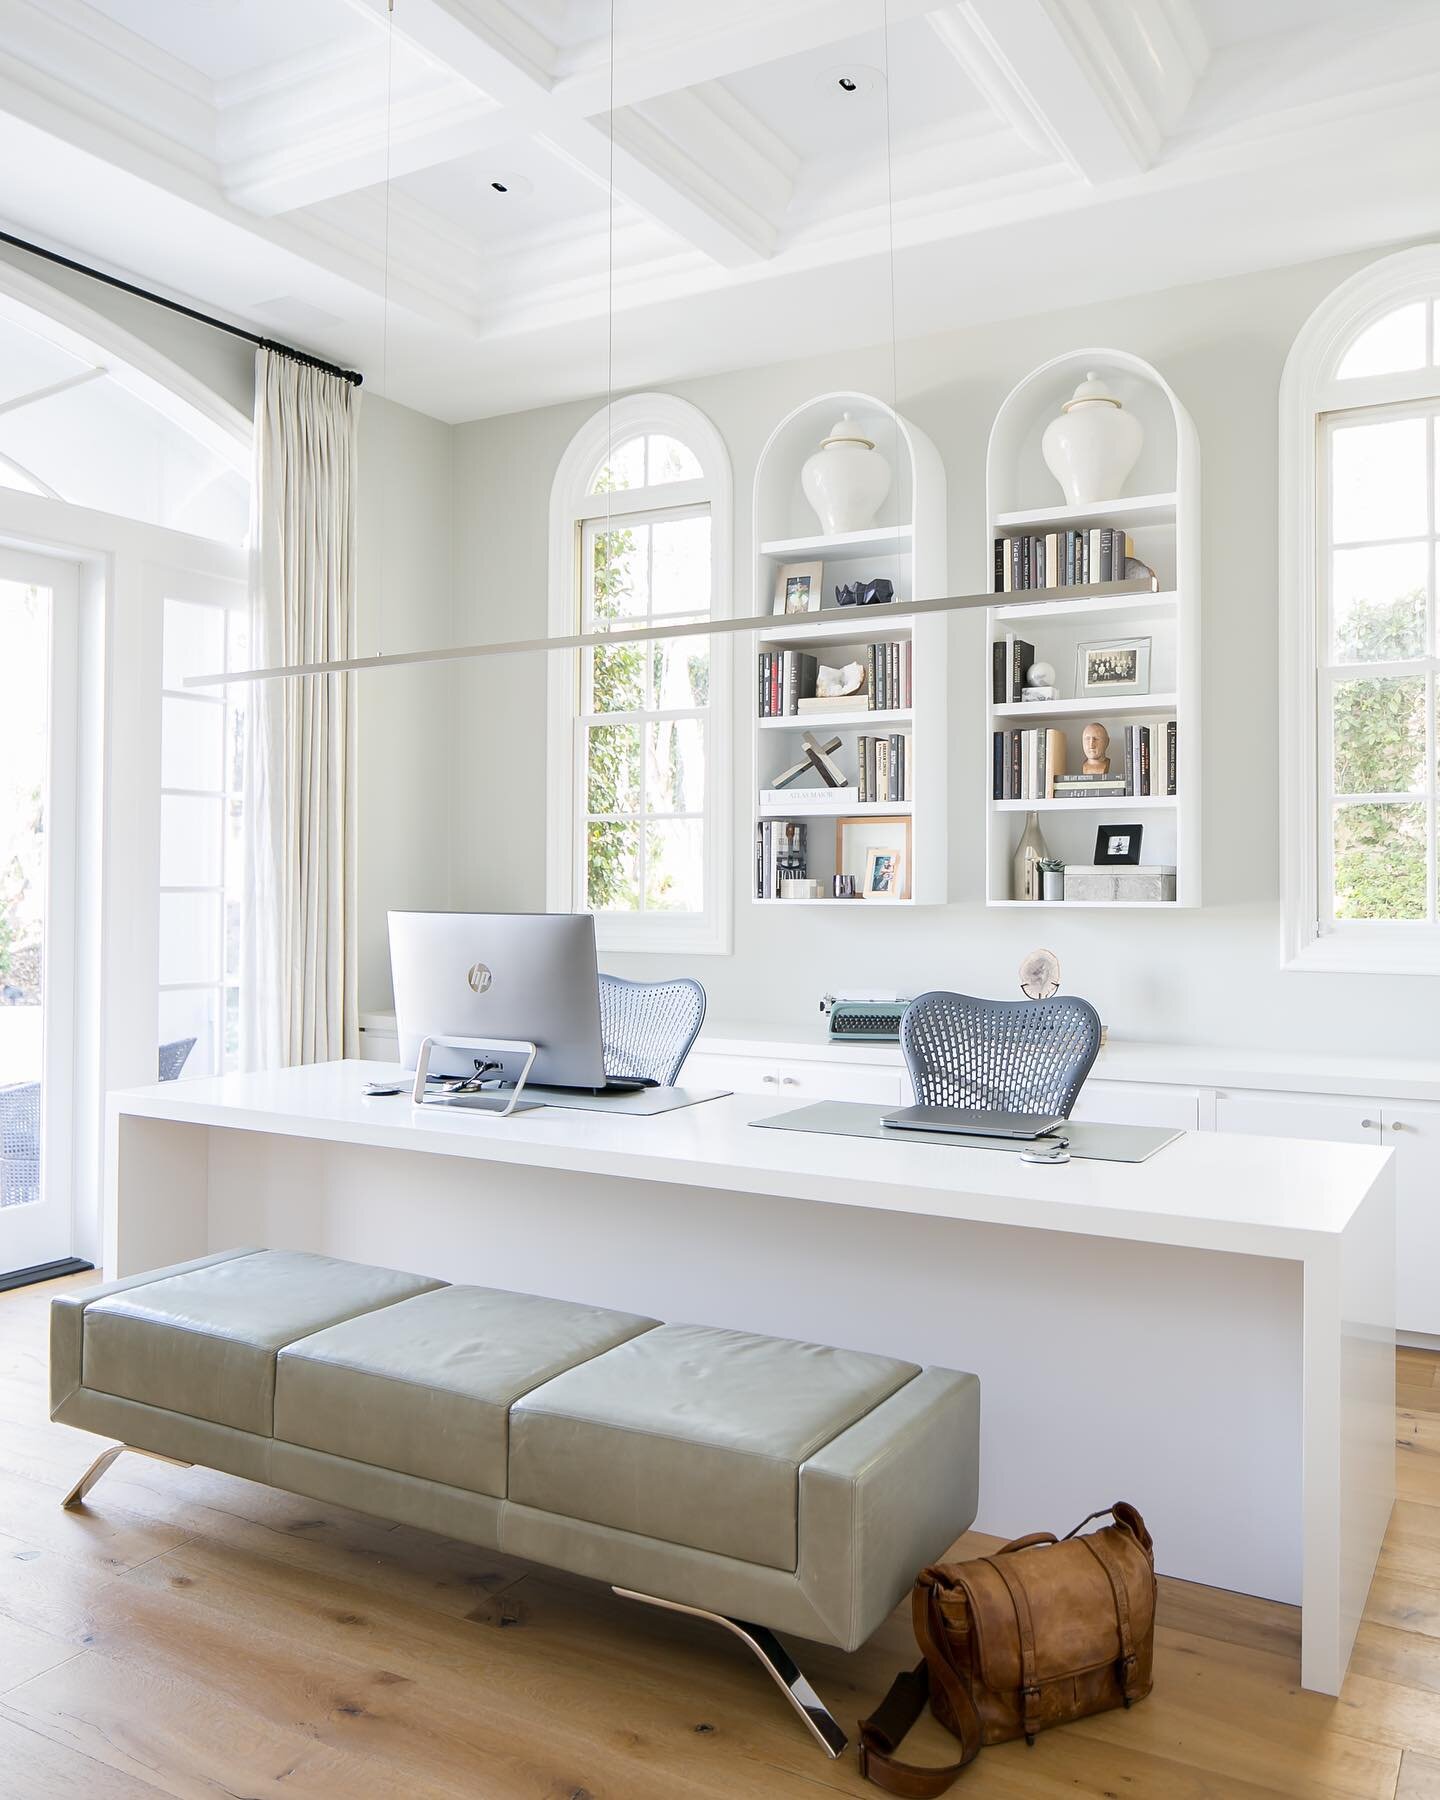 Mixing up some traditional and some contemporary in this home office. #archedbookcase #homeoffice #homeofficeideas #cotodecaza #archedwindows #leatherbench #whiteroom #interiordesigner